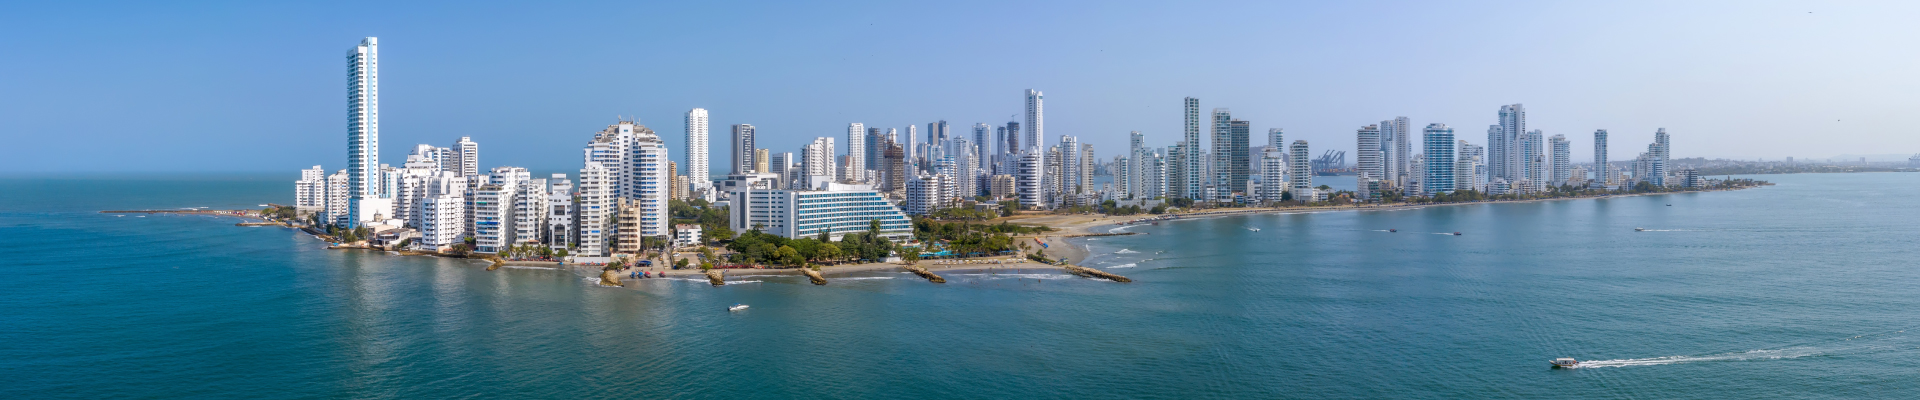 Cartagena de Indias in Colombia, on the Caribbean coast of South America. Panoramic view of the Bocagrande district.